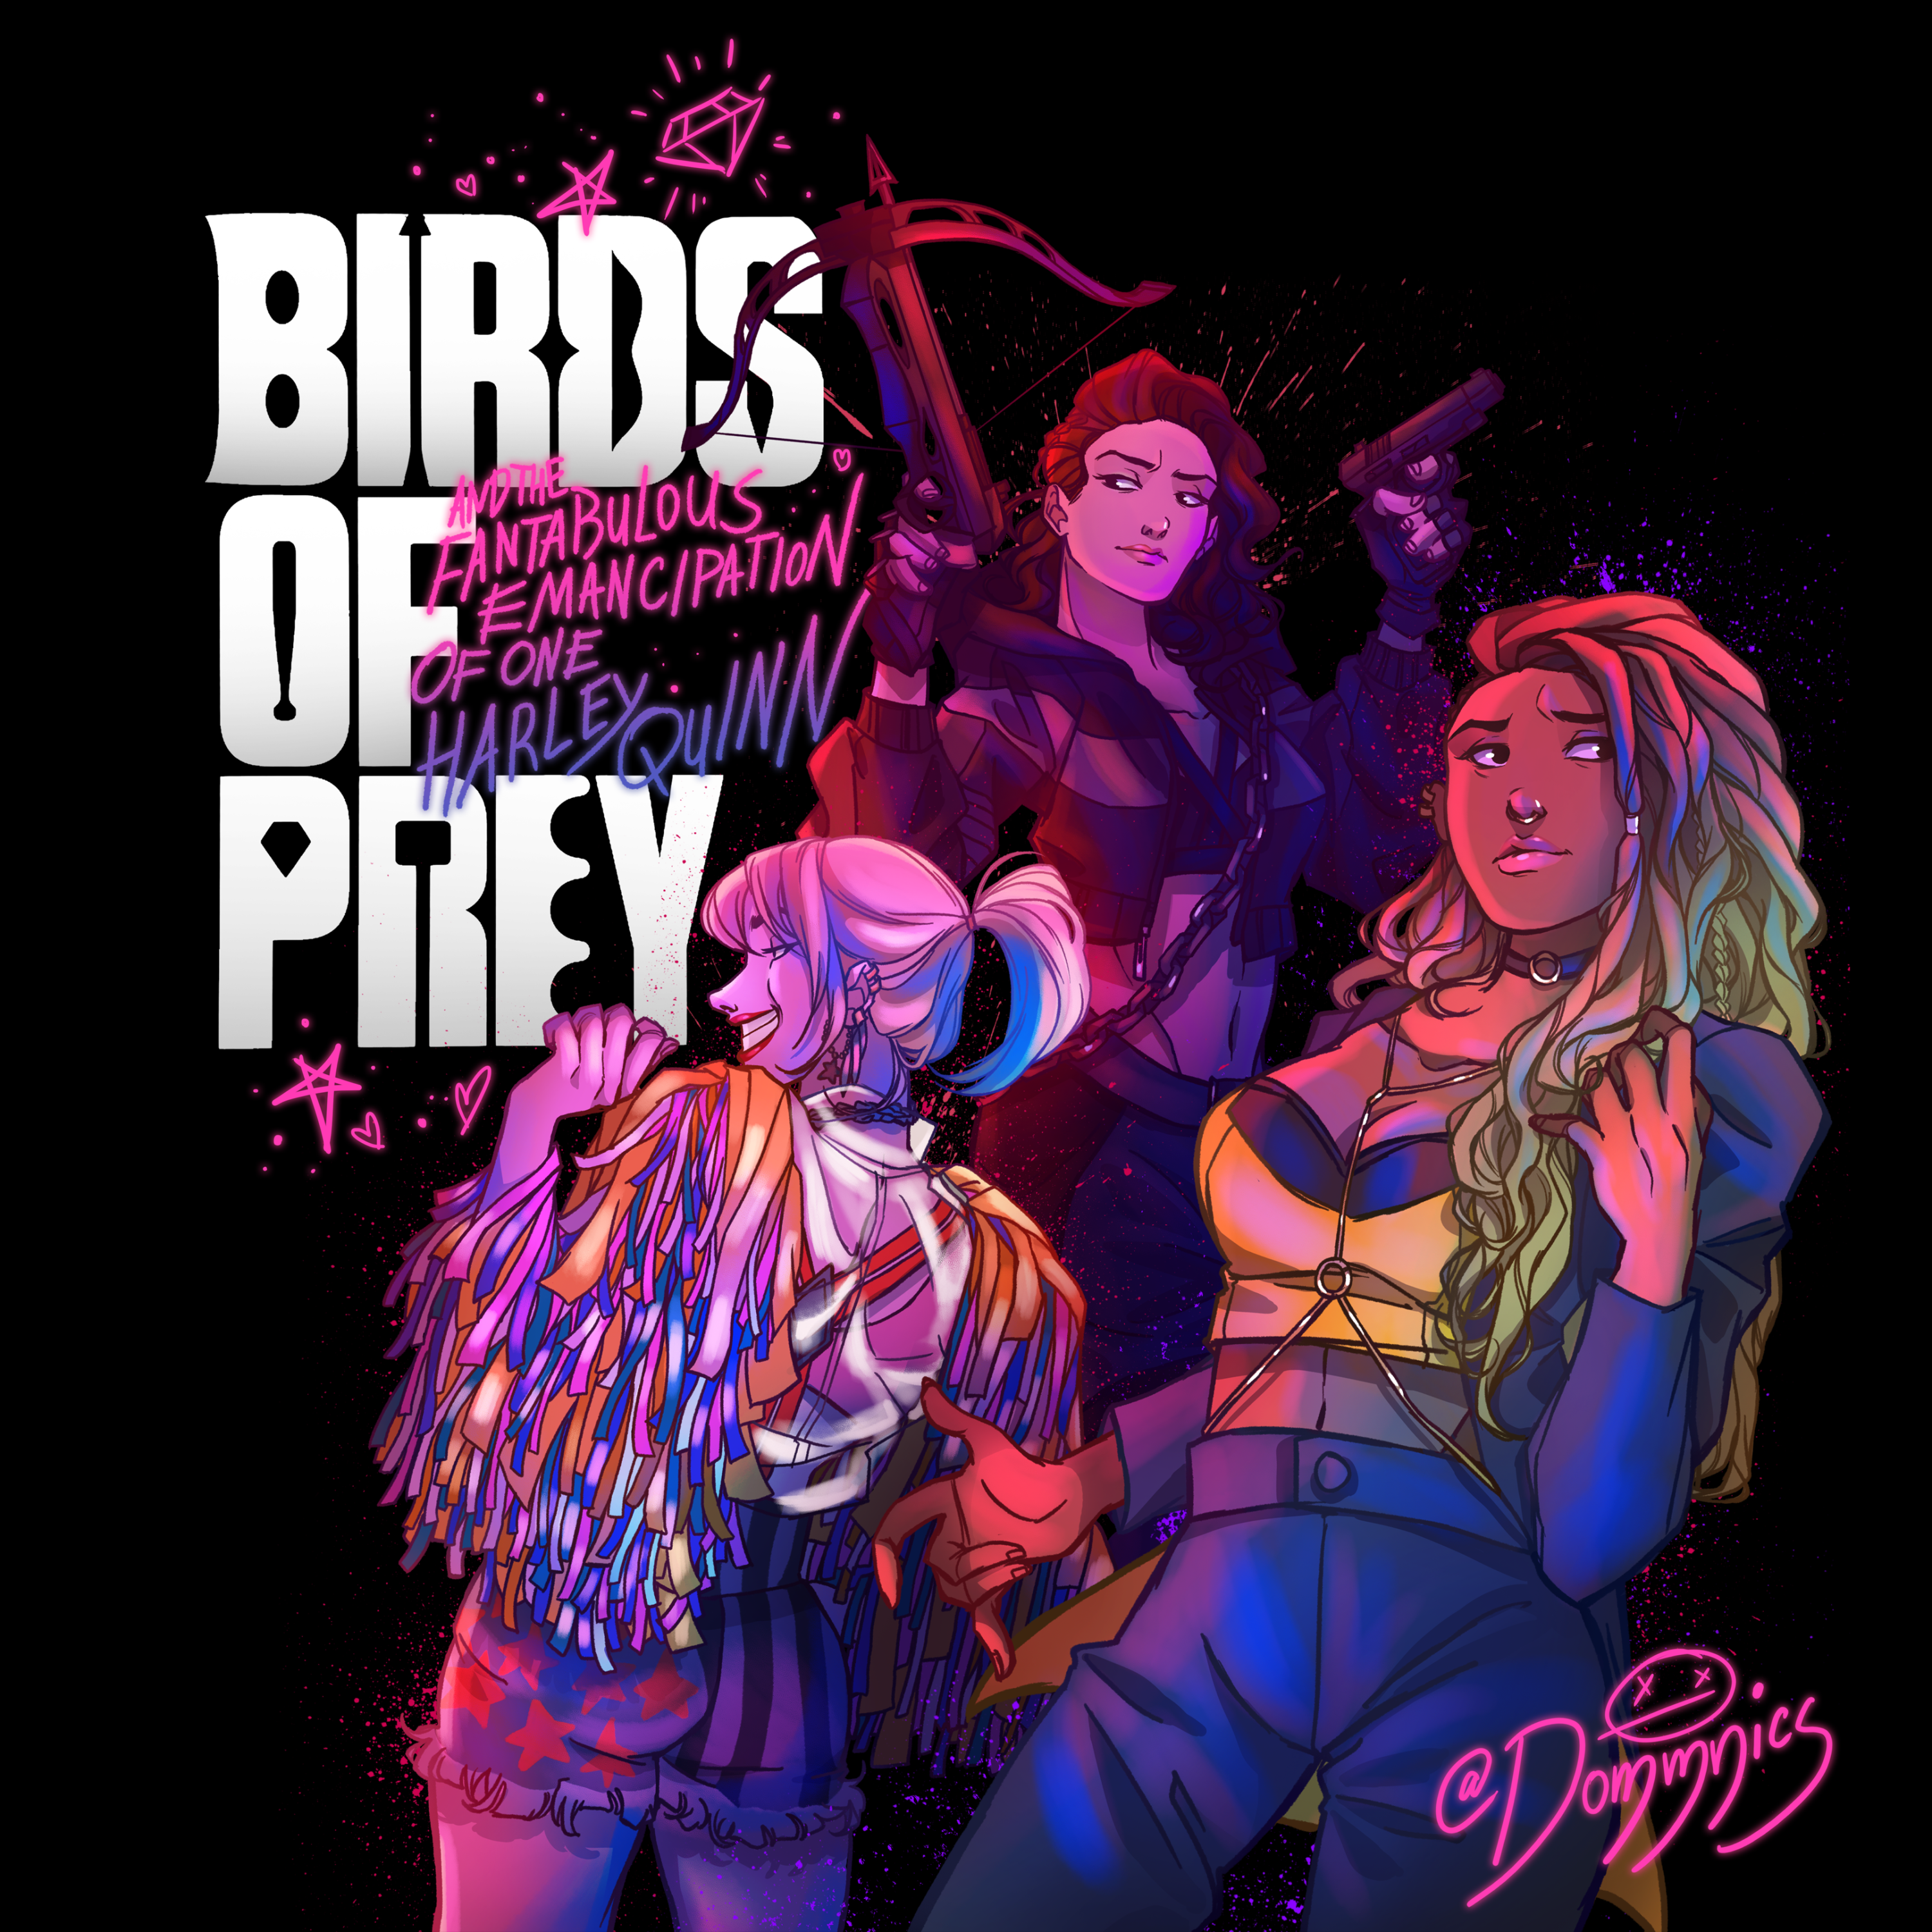 Birds of Prey (and the Fantabulous Emancipation of One Harley Quinn) Pfp by Domnics